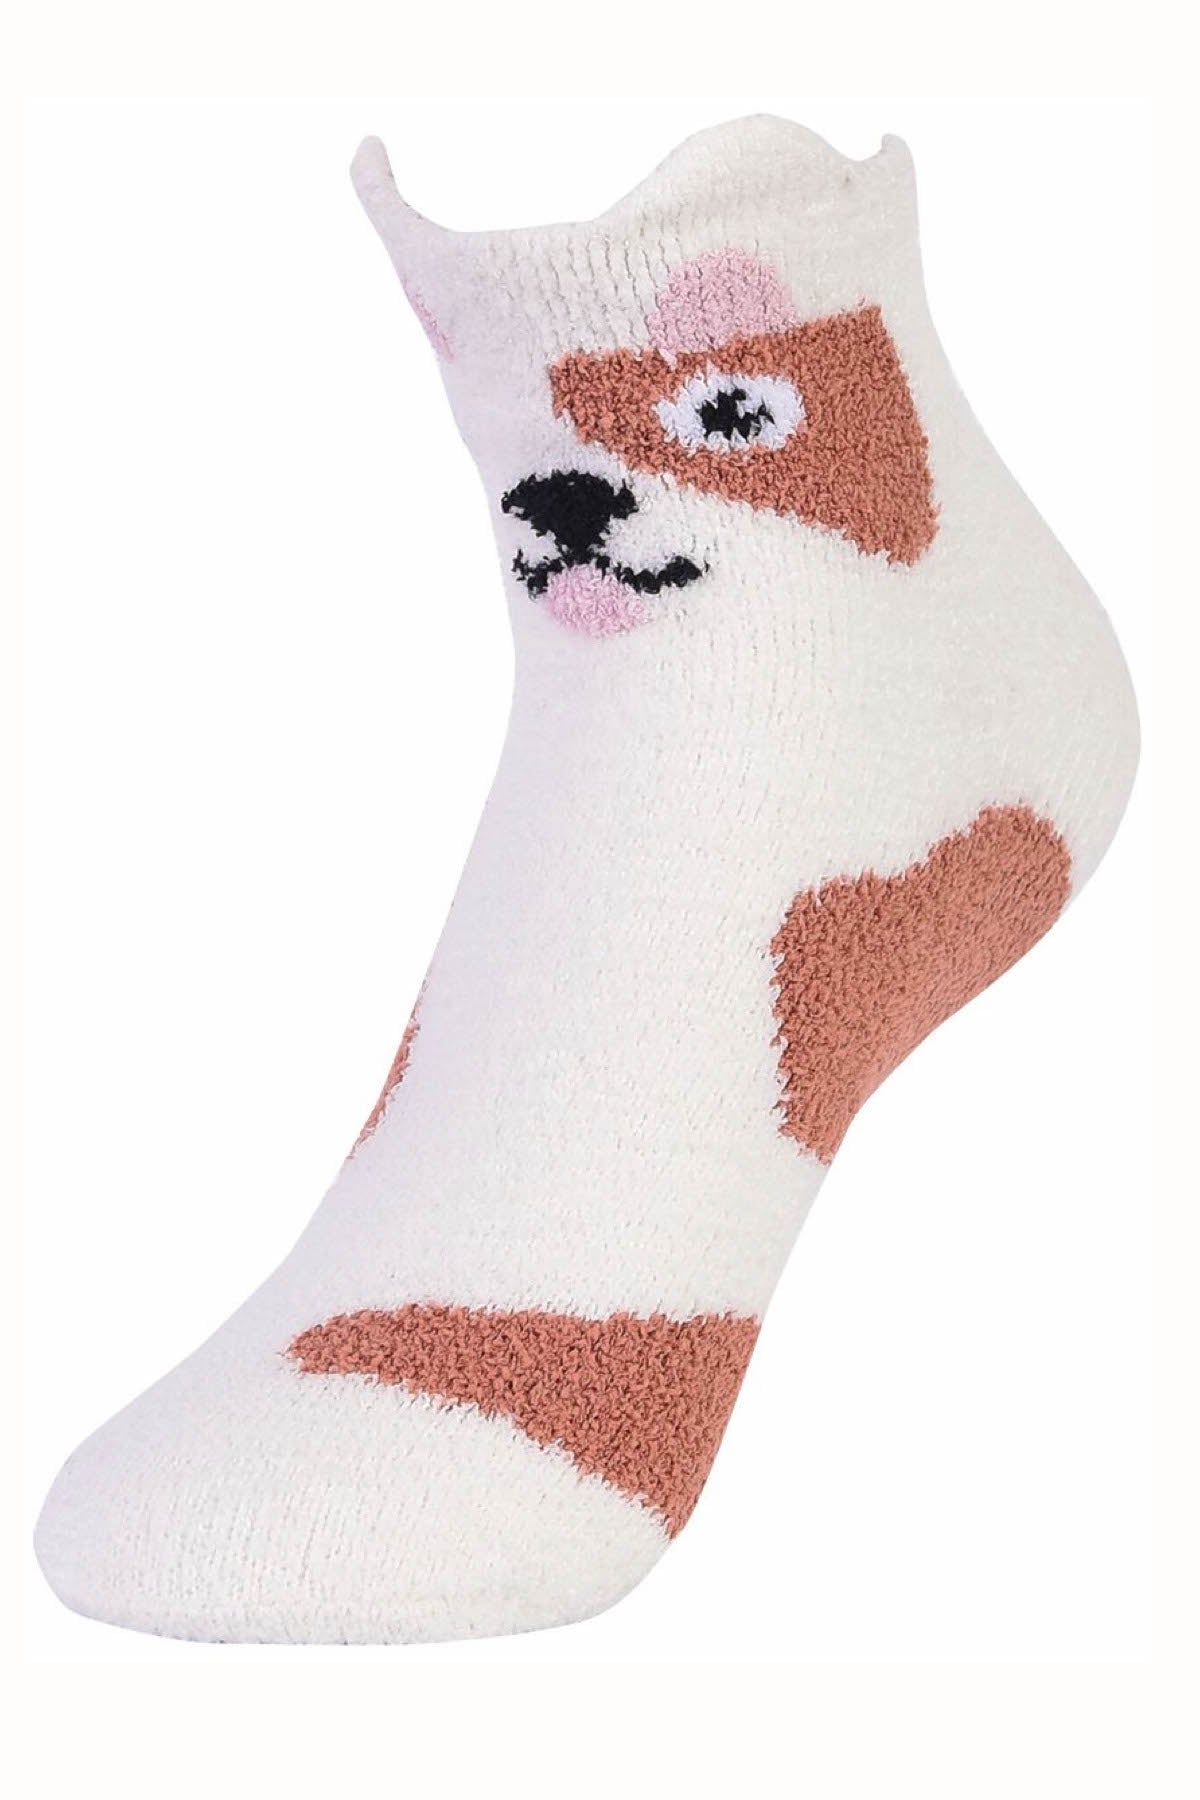 Sofra White/Brown Puppy Cozy Picot Ankle Socks with Grippers